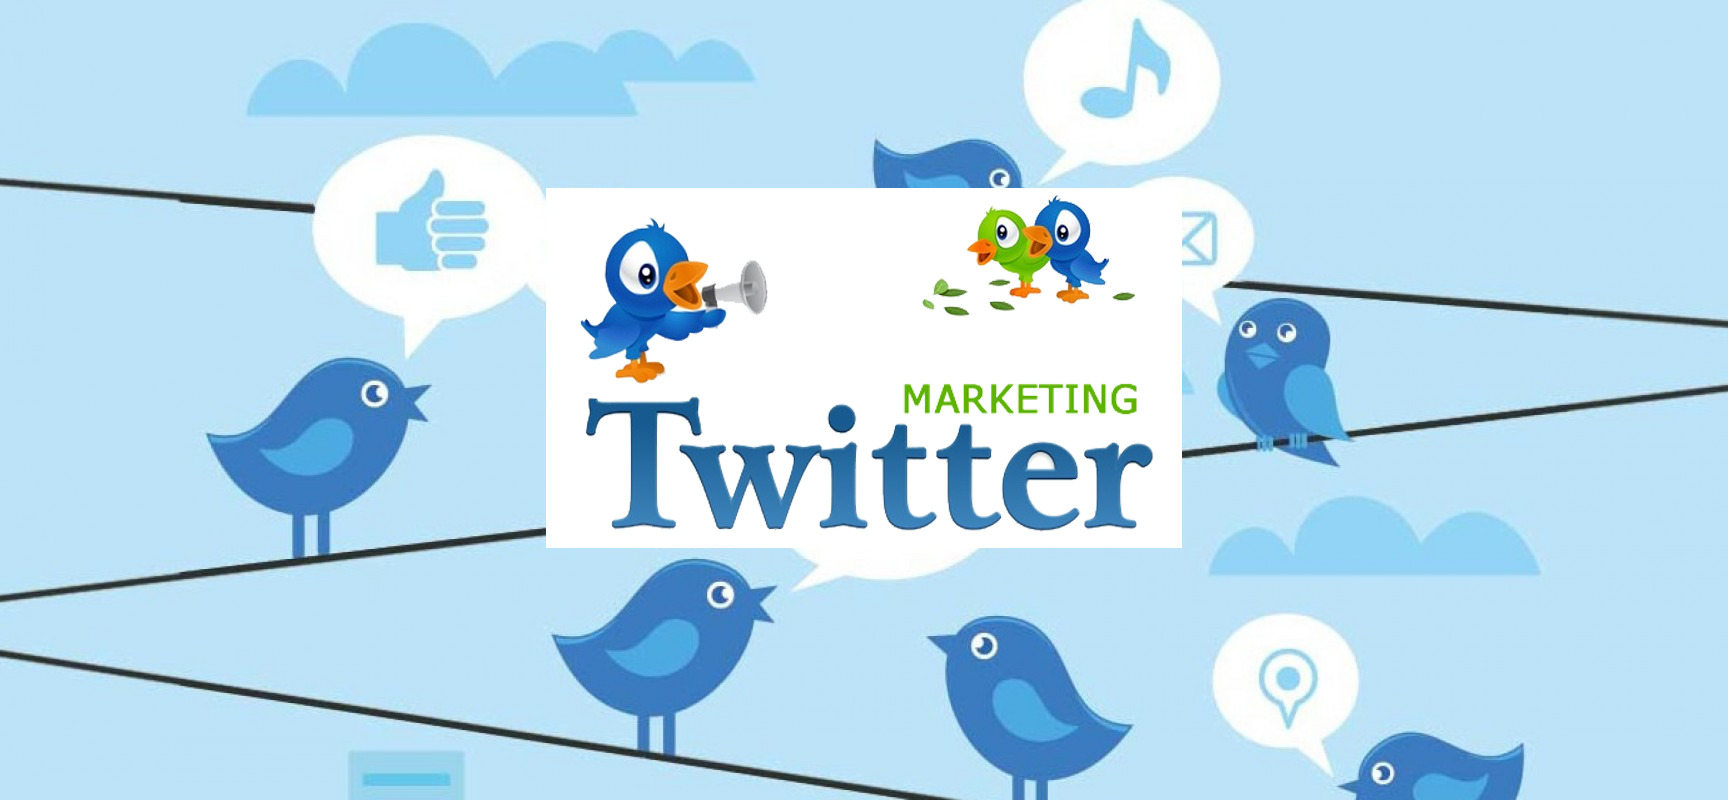 twitter marketing services india, twitter marketing india, twitter marketing agency, twitter marketing agency in delhi, twitter advertising agency, twitter influencer marketing, best twitter marketing agency, twitter marketing services agency, twitter influencer agency, twitter marketing company